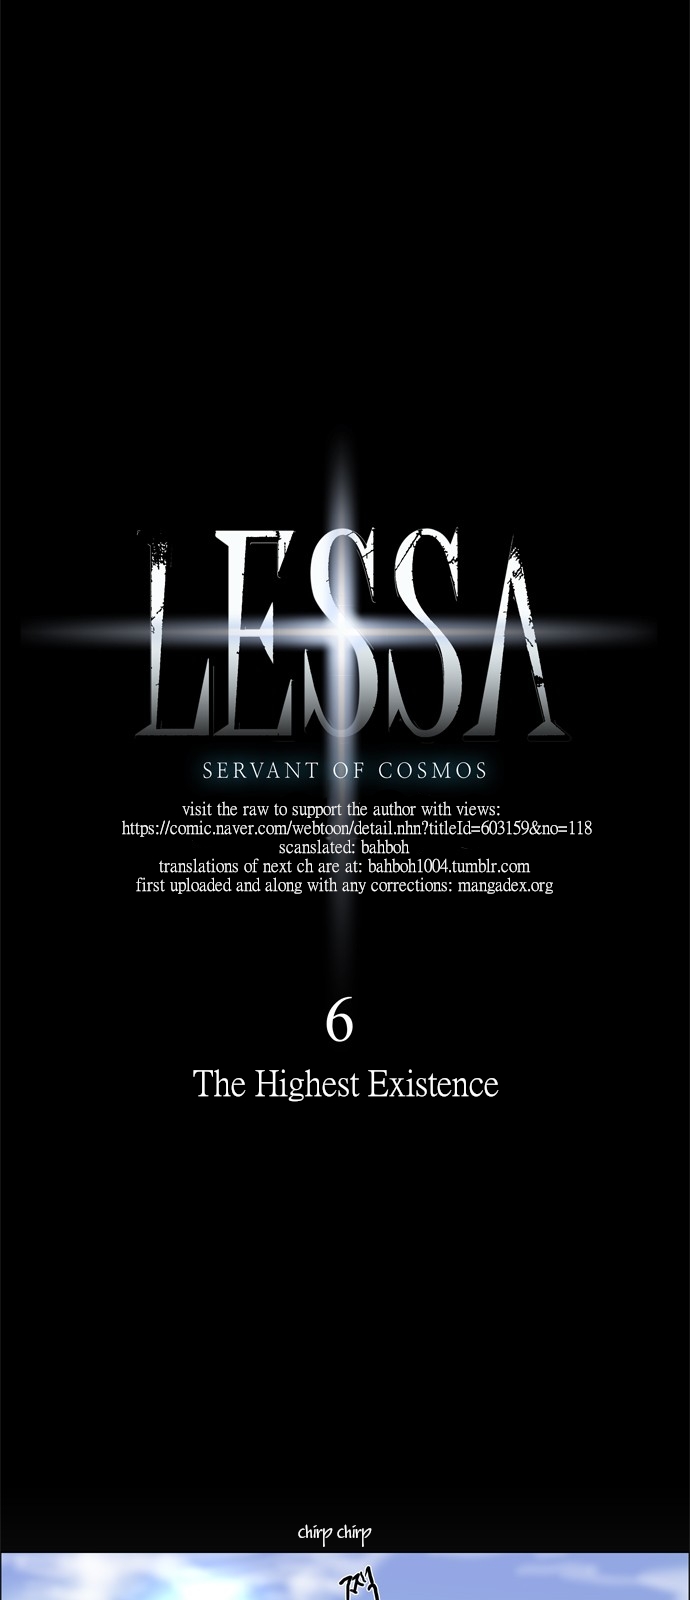 LESSA Servant of Cosmos Ch. 6 The Highest Existence <6>